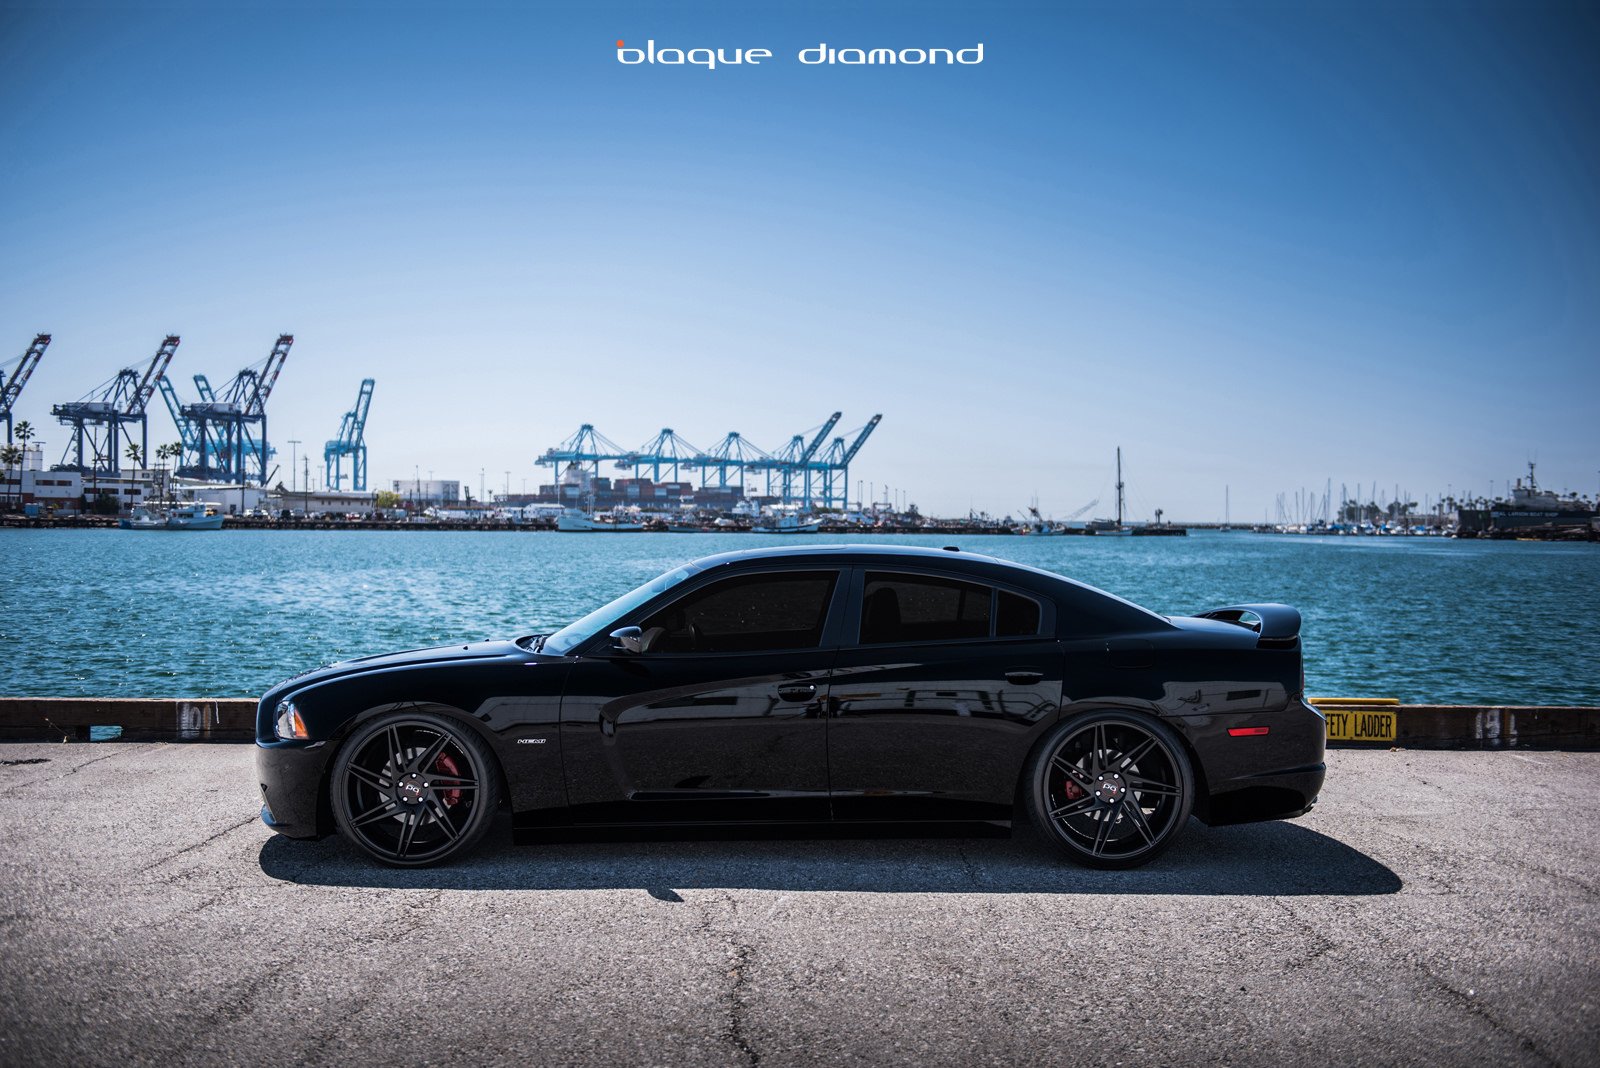 dodge, Charger rt, Cars Wallpaper